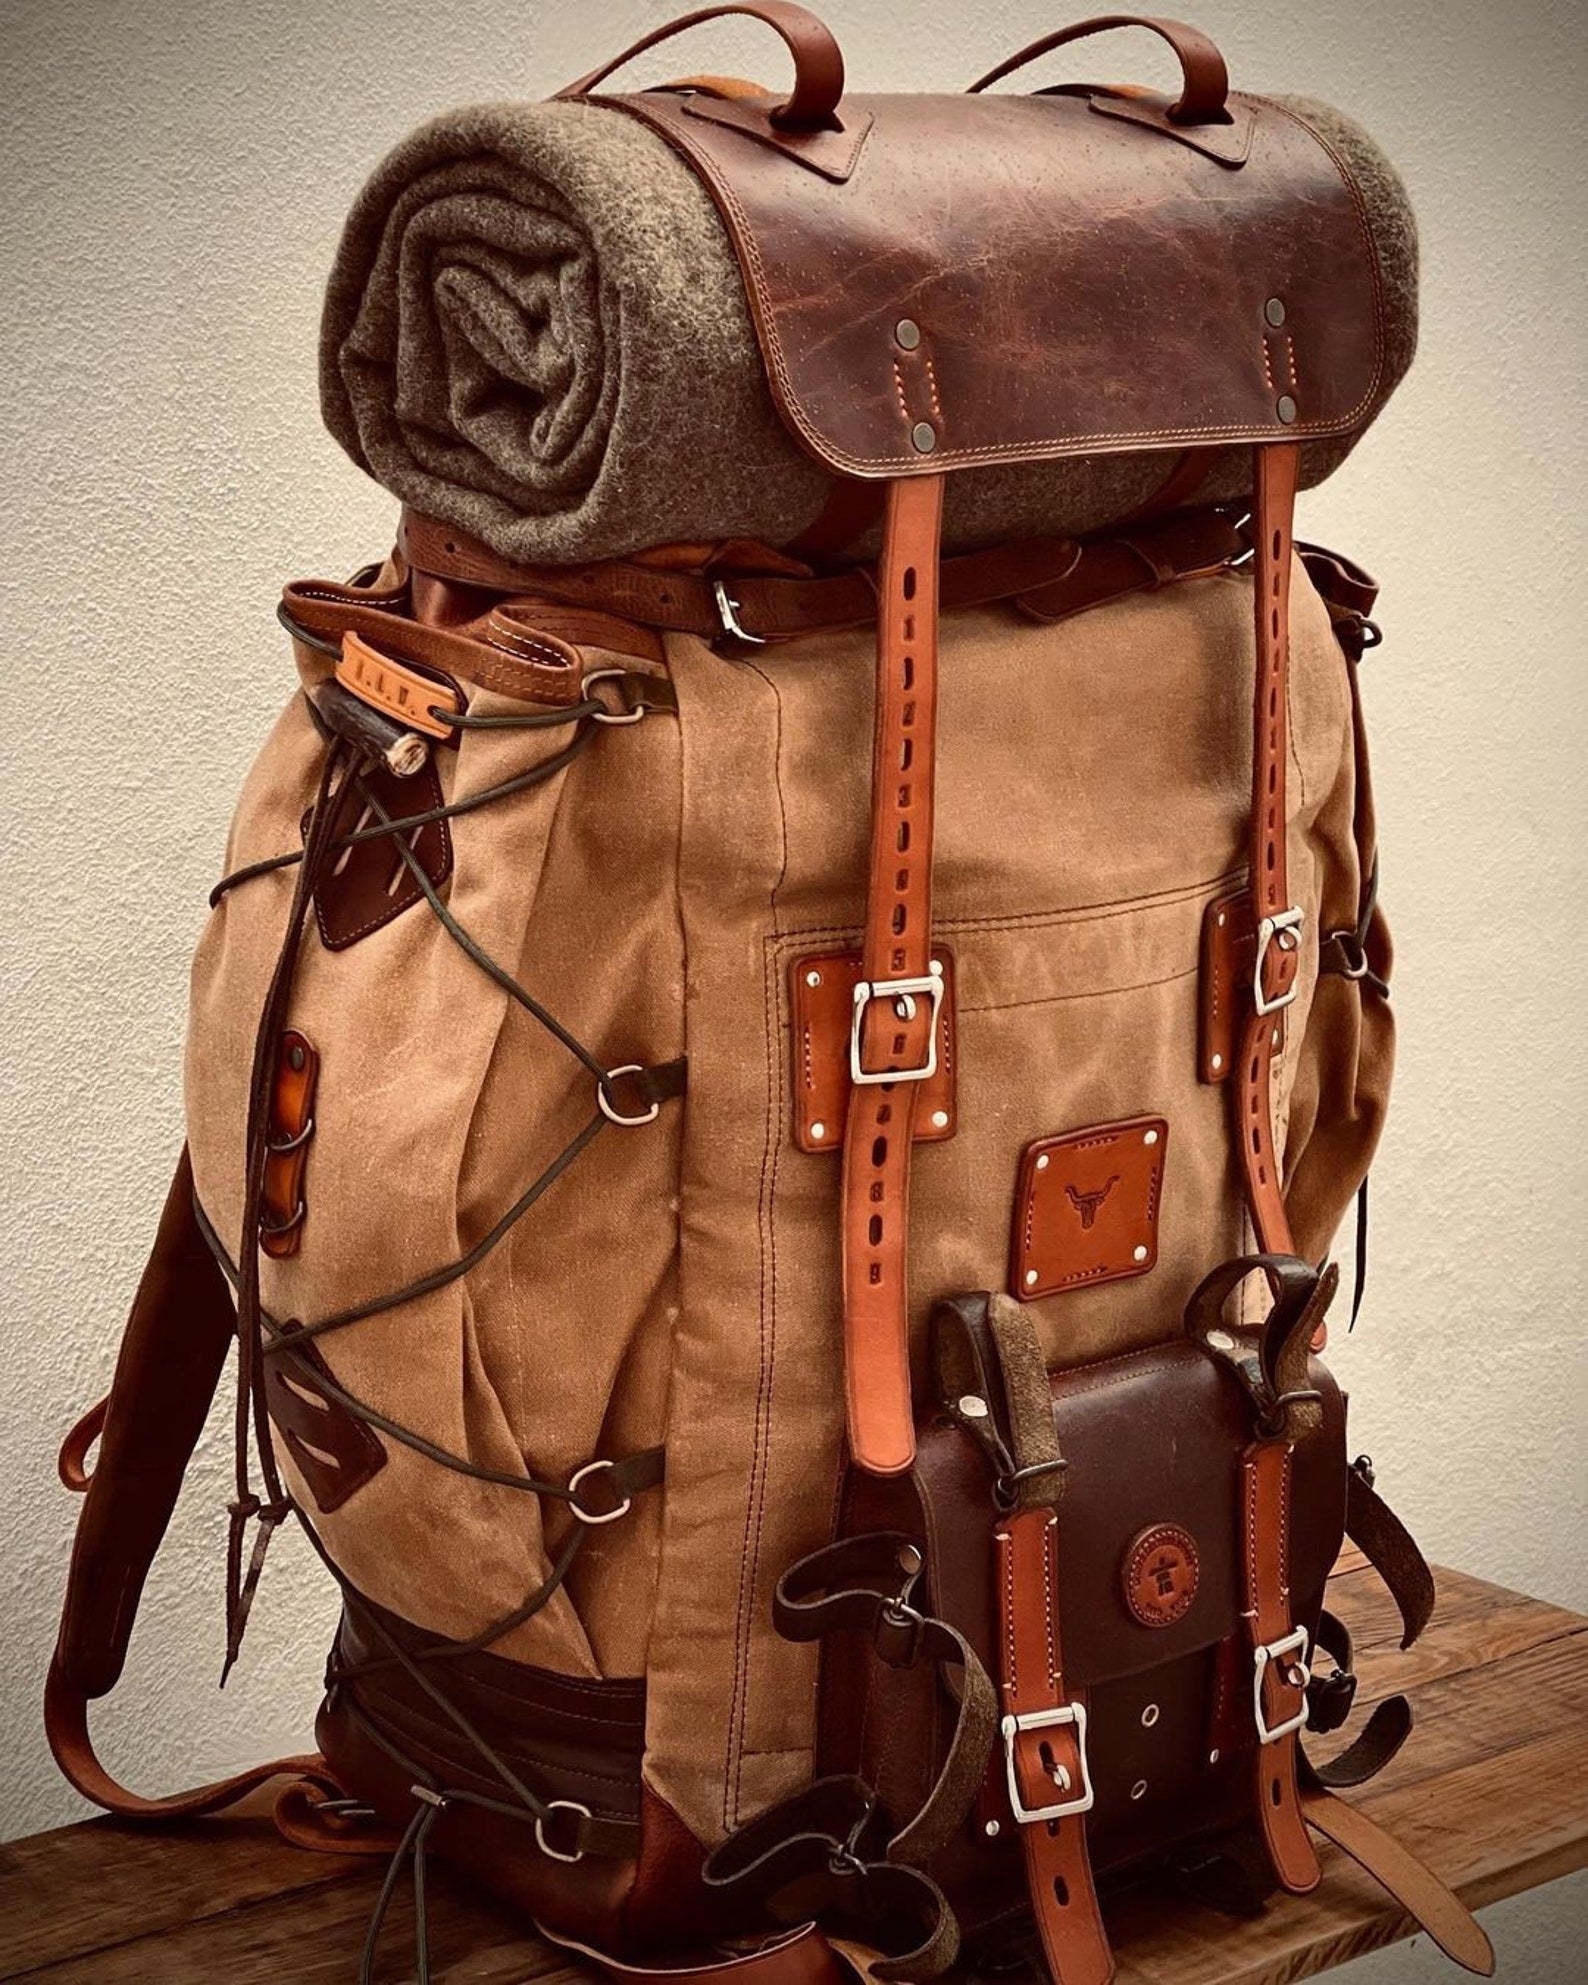 Vintage Bushcraft Camping Handmade Backpack. Leather-Waxed Canvas